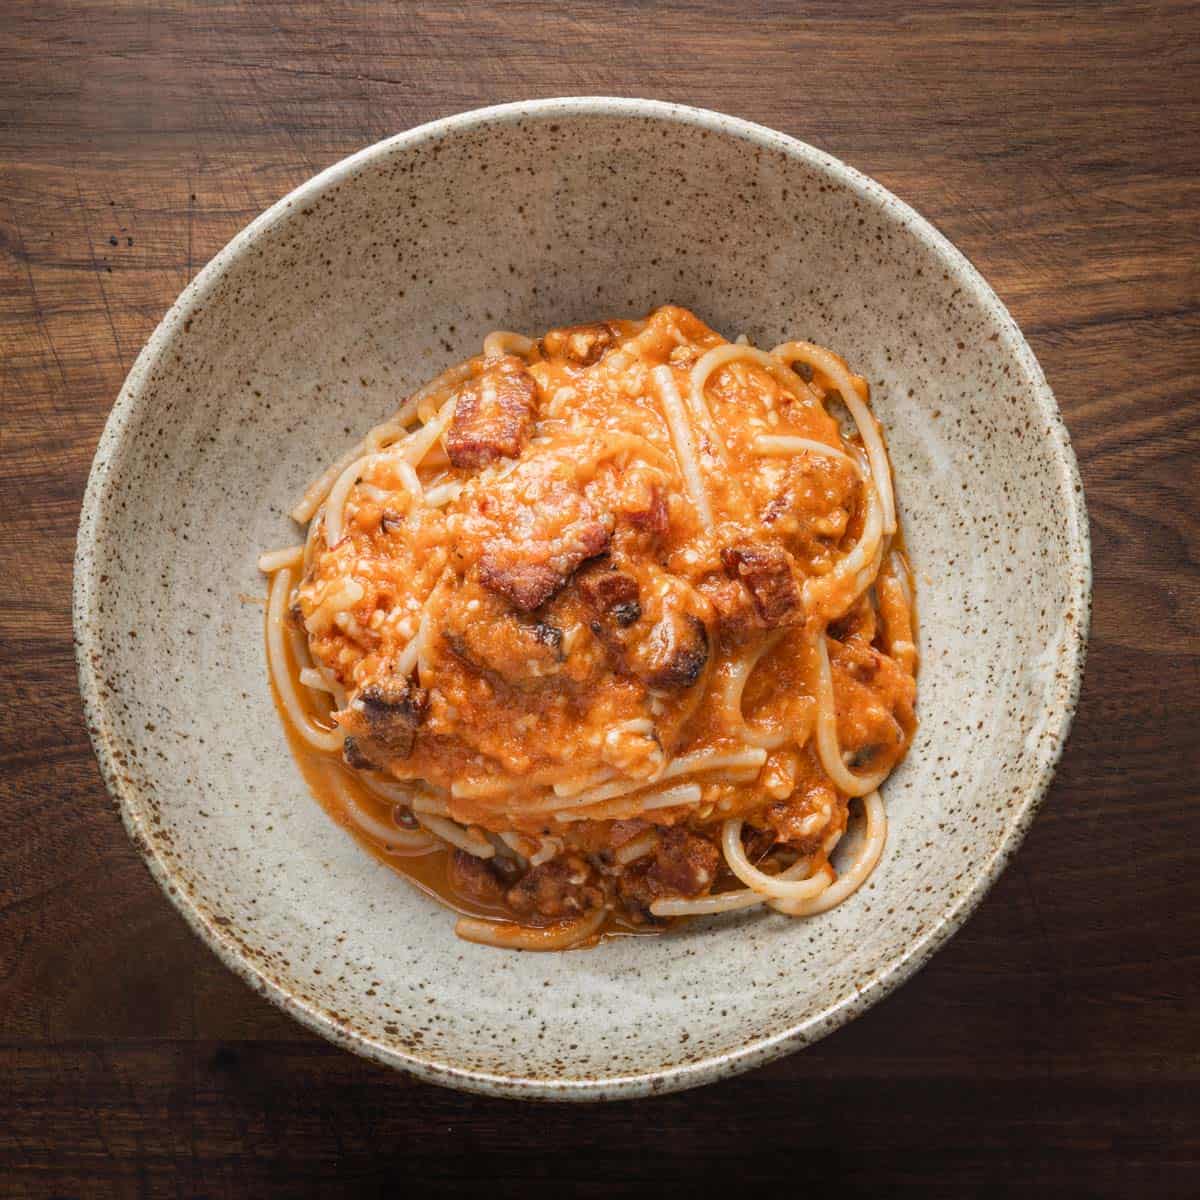 A pan of spaghetti with tomato sauce, cheese and beef bacon.